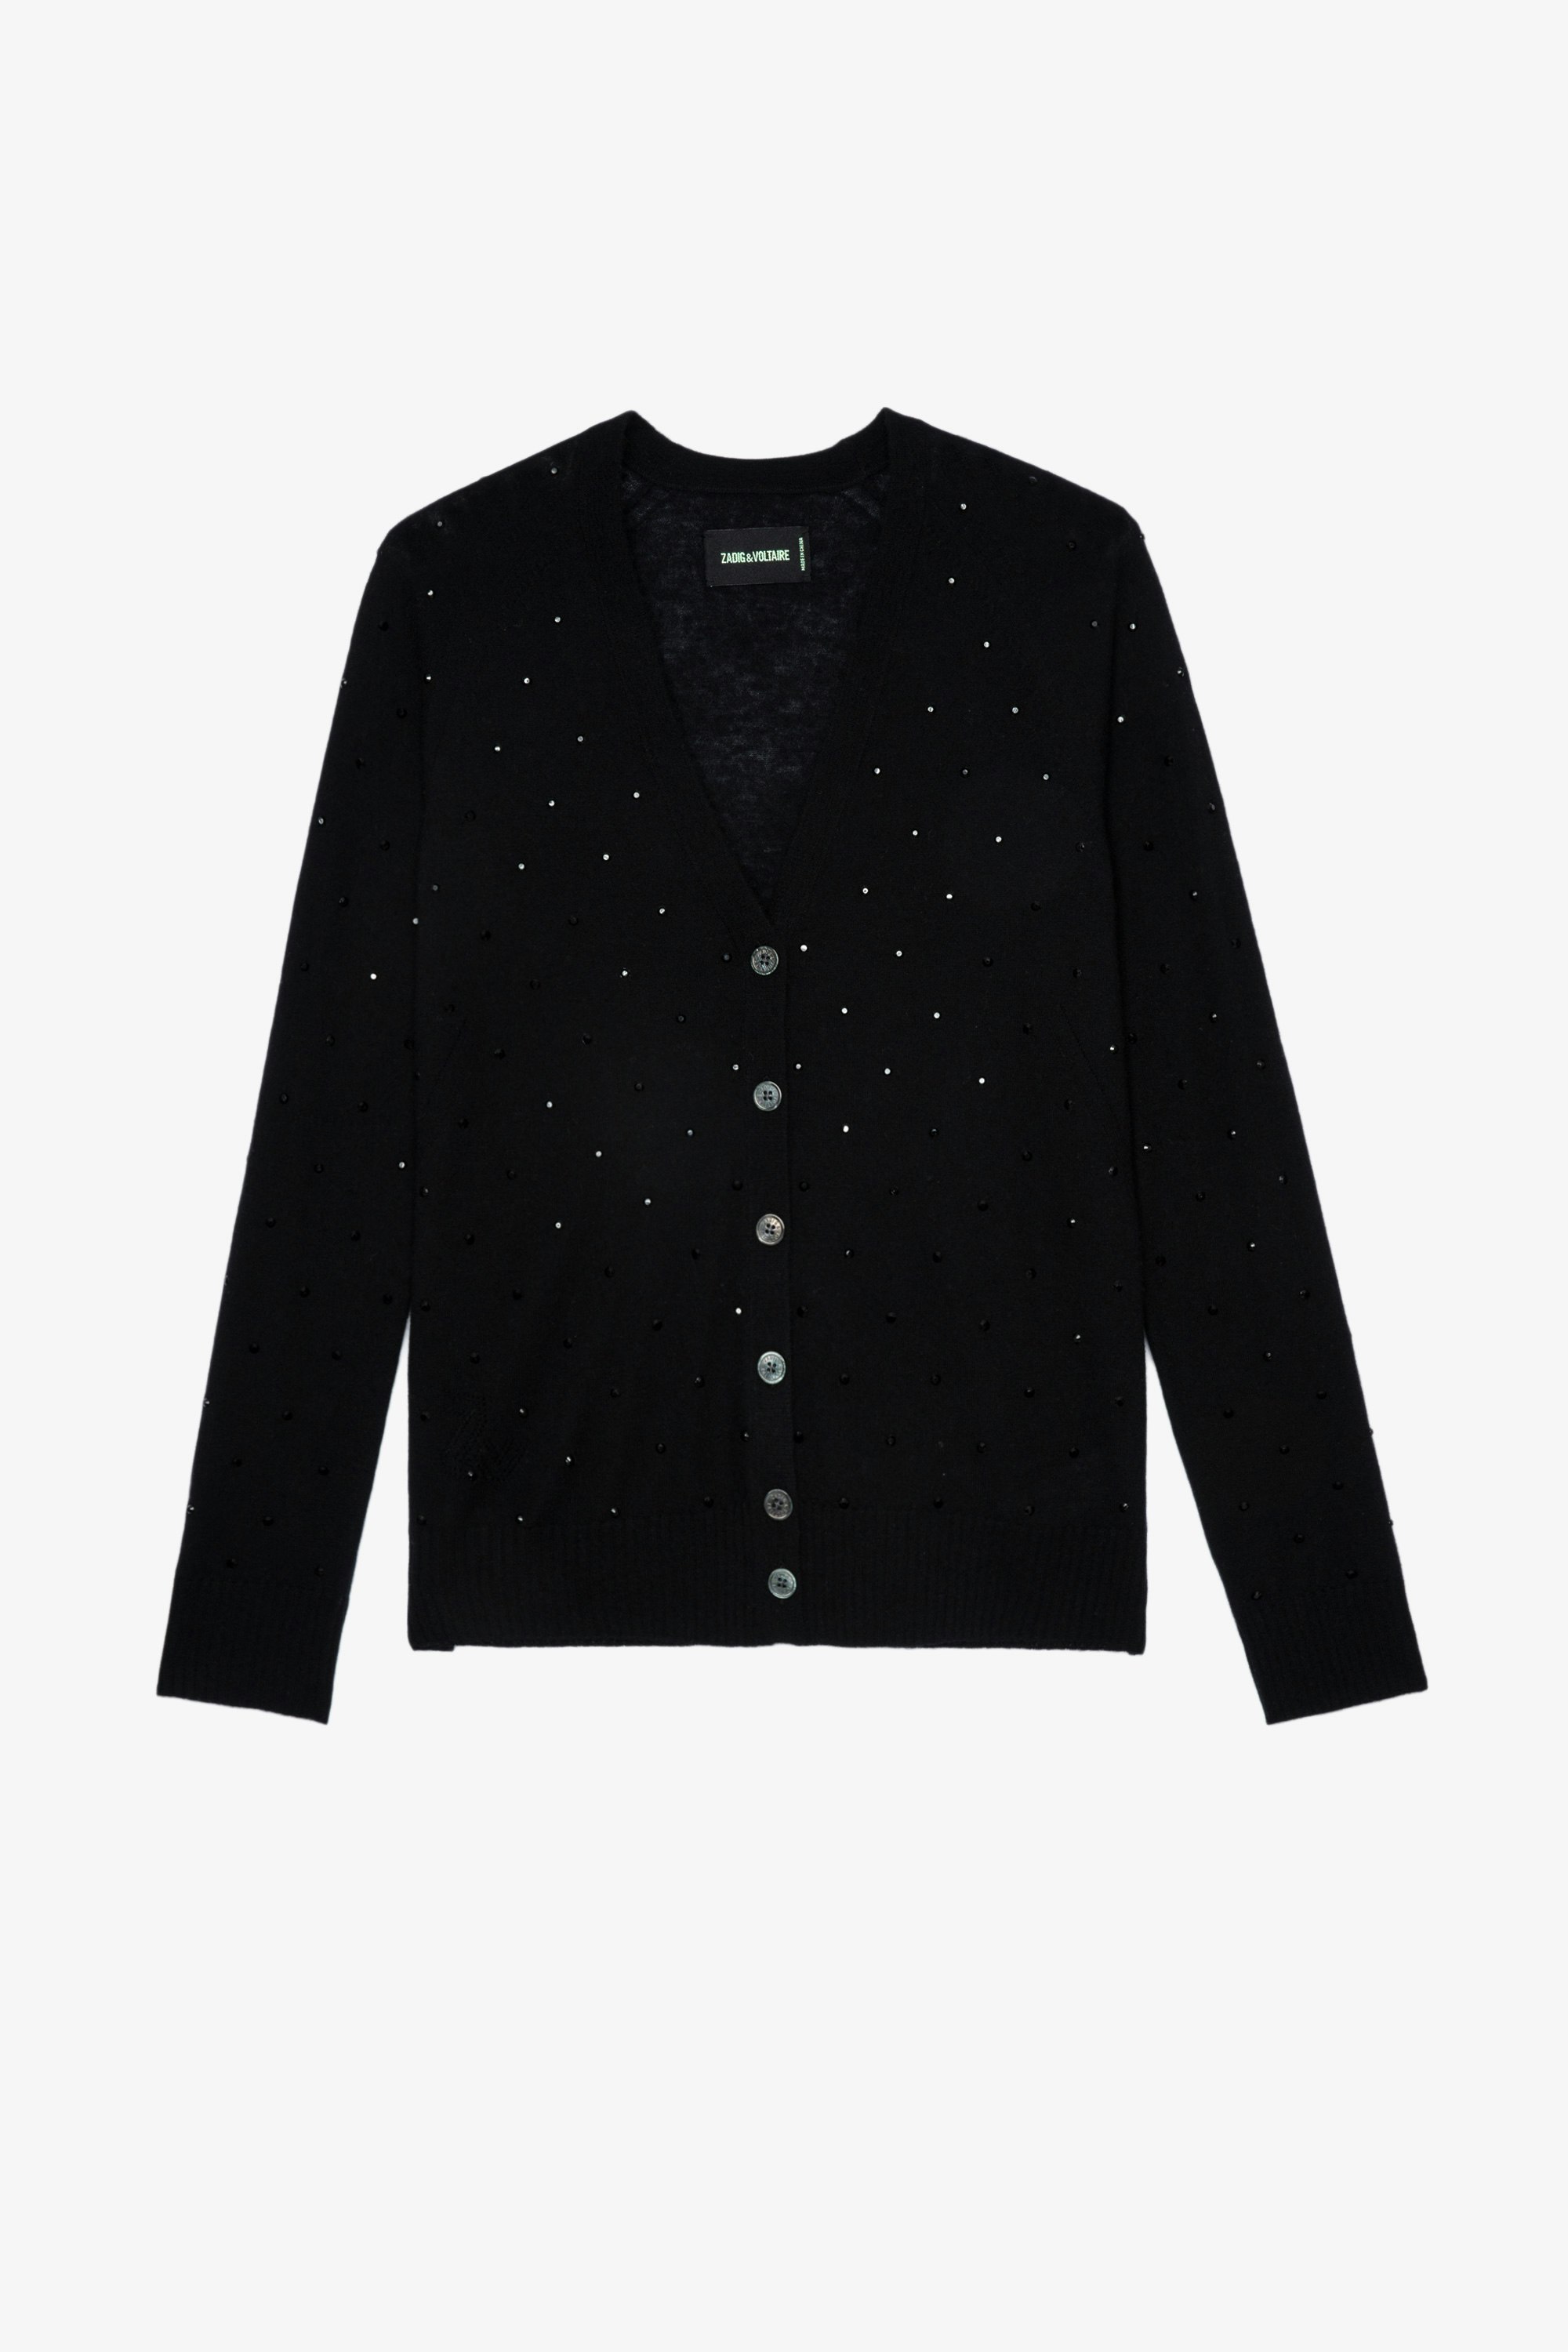 Jim Cashmere Cardigan Women's black cashmere button front cardigan with crystal embellishment